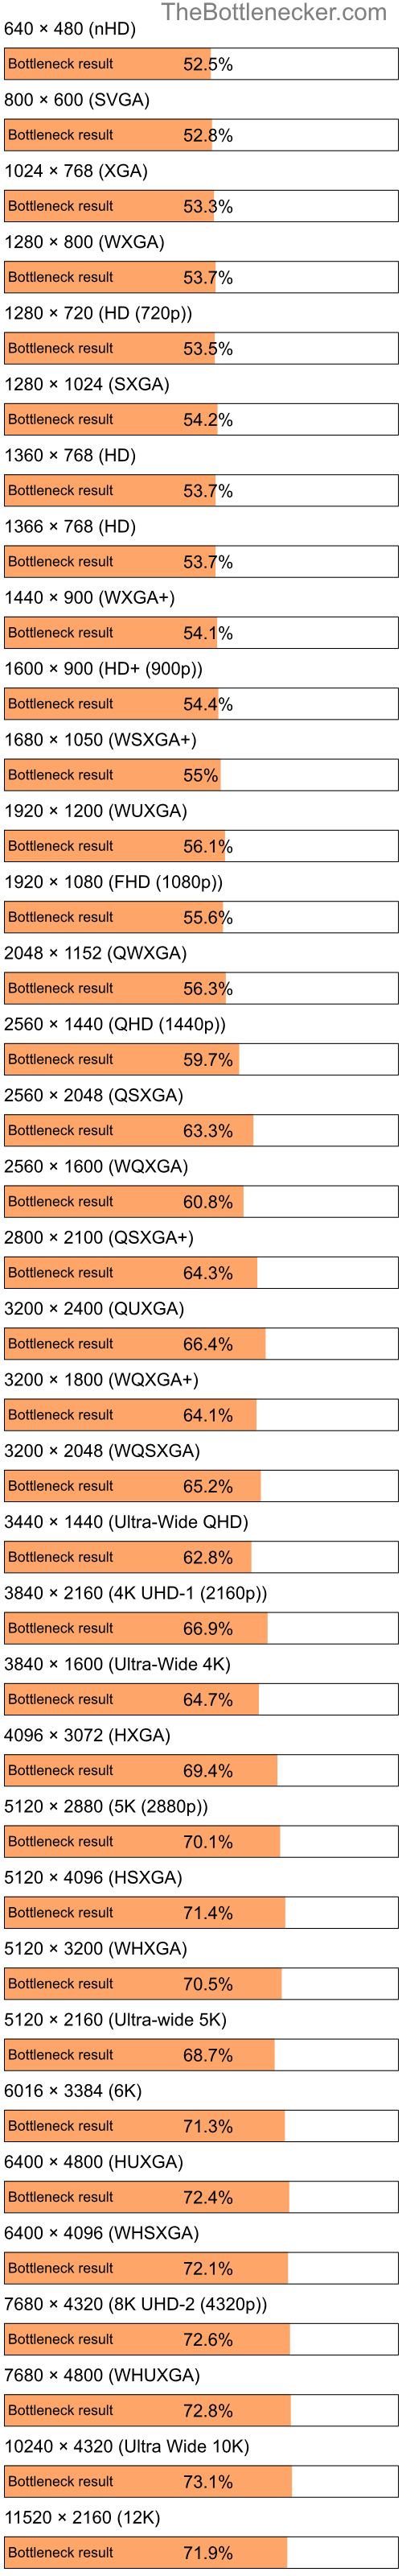 Bottleneck results by resolution for Intel Atom N280 and AMD Radeon HD 4200 in Processor Intense Tasks